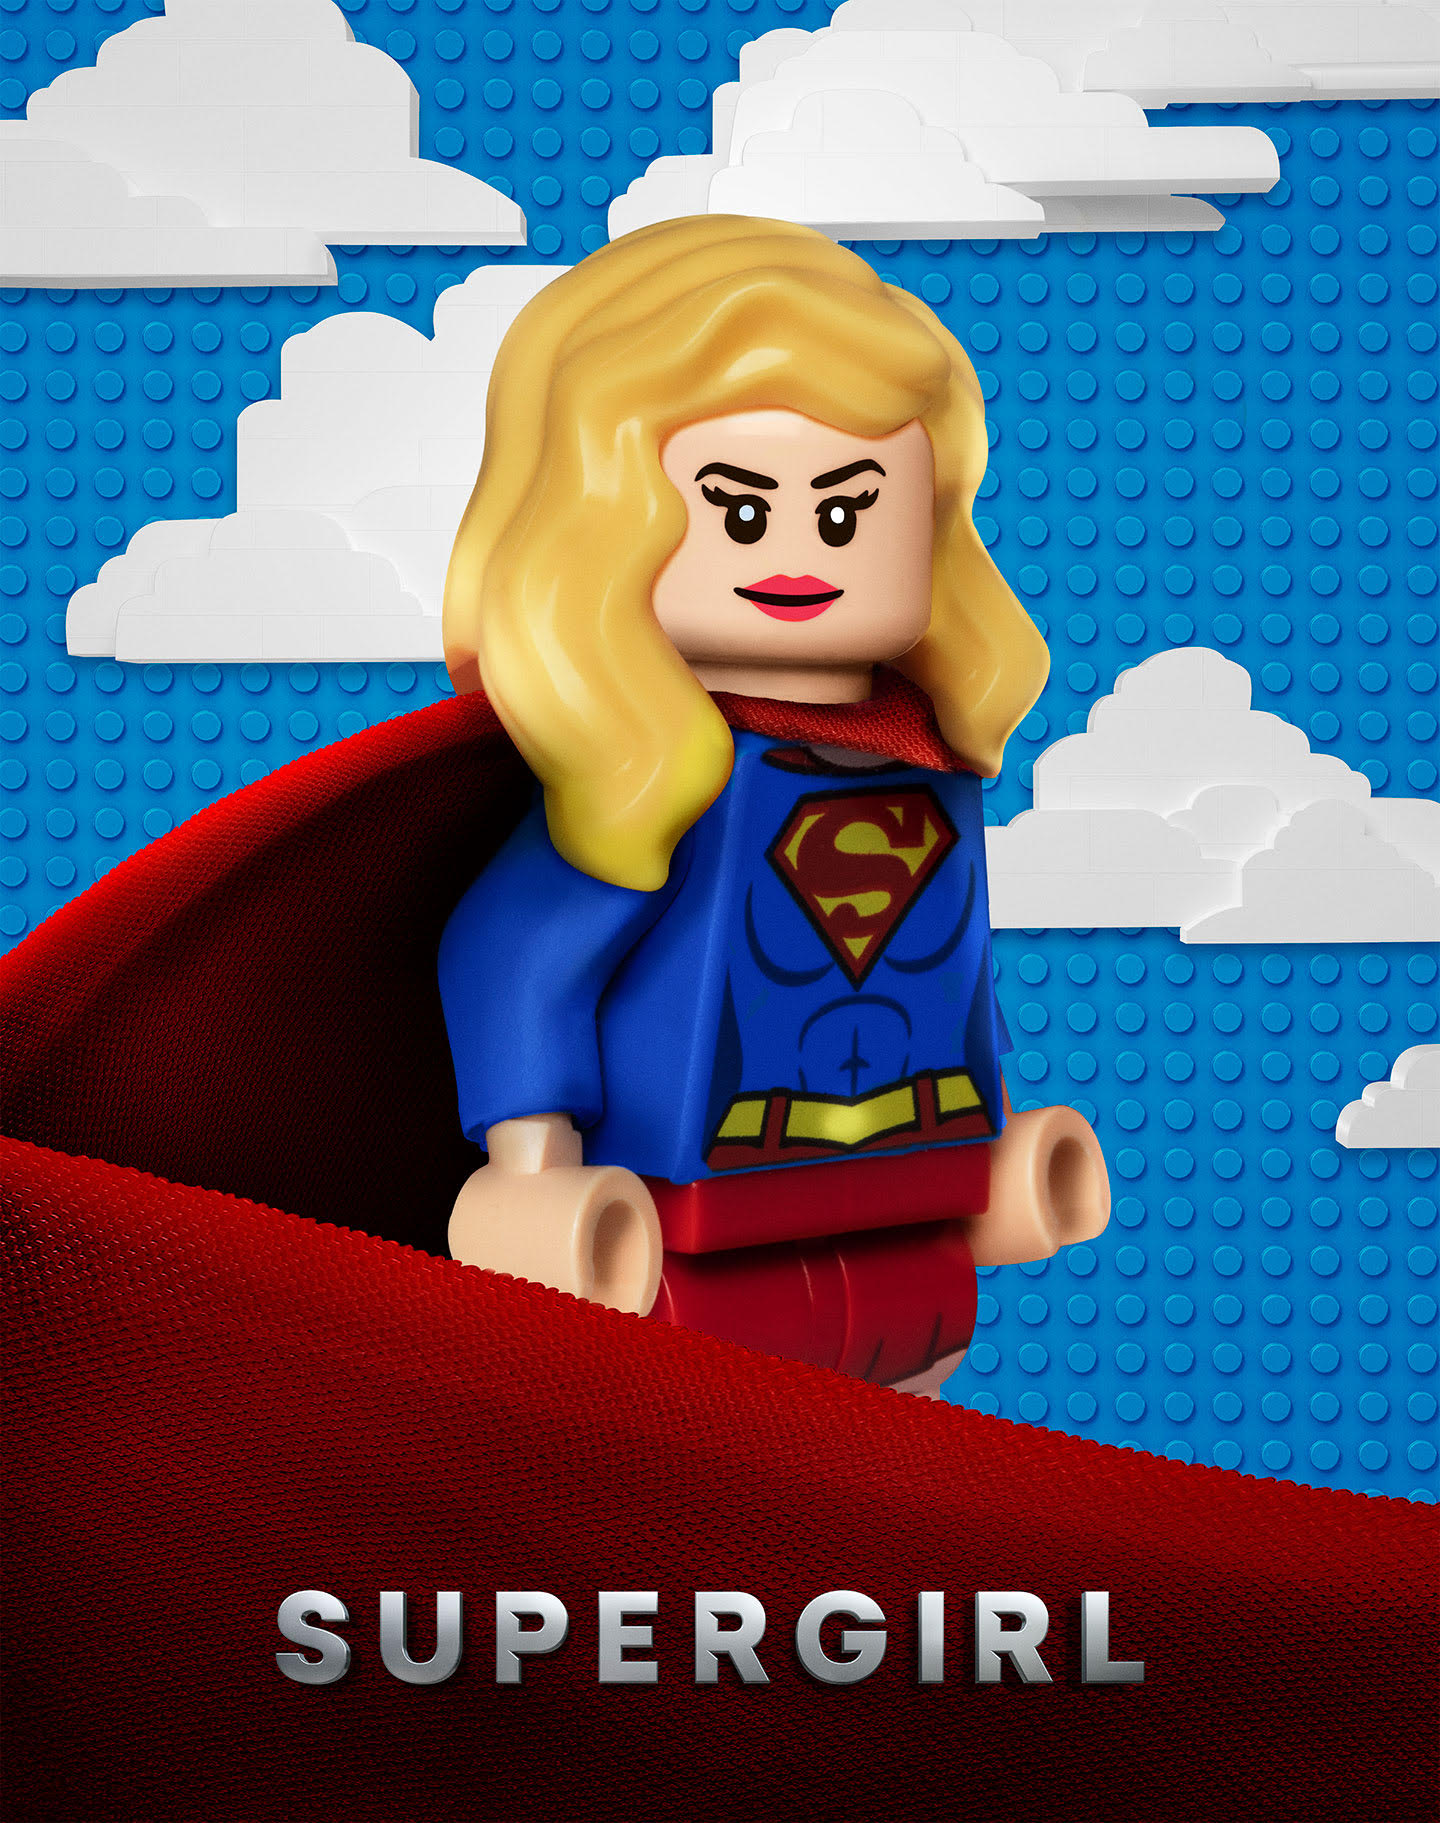 LEGO version of Warner Bros. Television Group's SUPERGIRL billboard on the Studio's west wall. (Credit: © 2017 Warner Bros. Entertainment Inc. All Rights Reserved.)